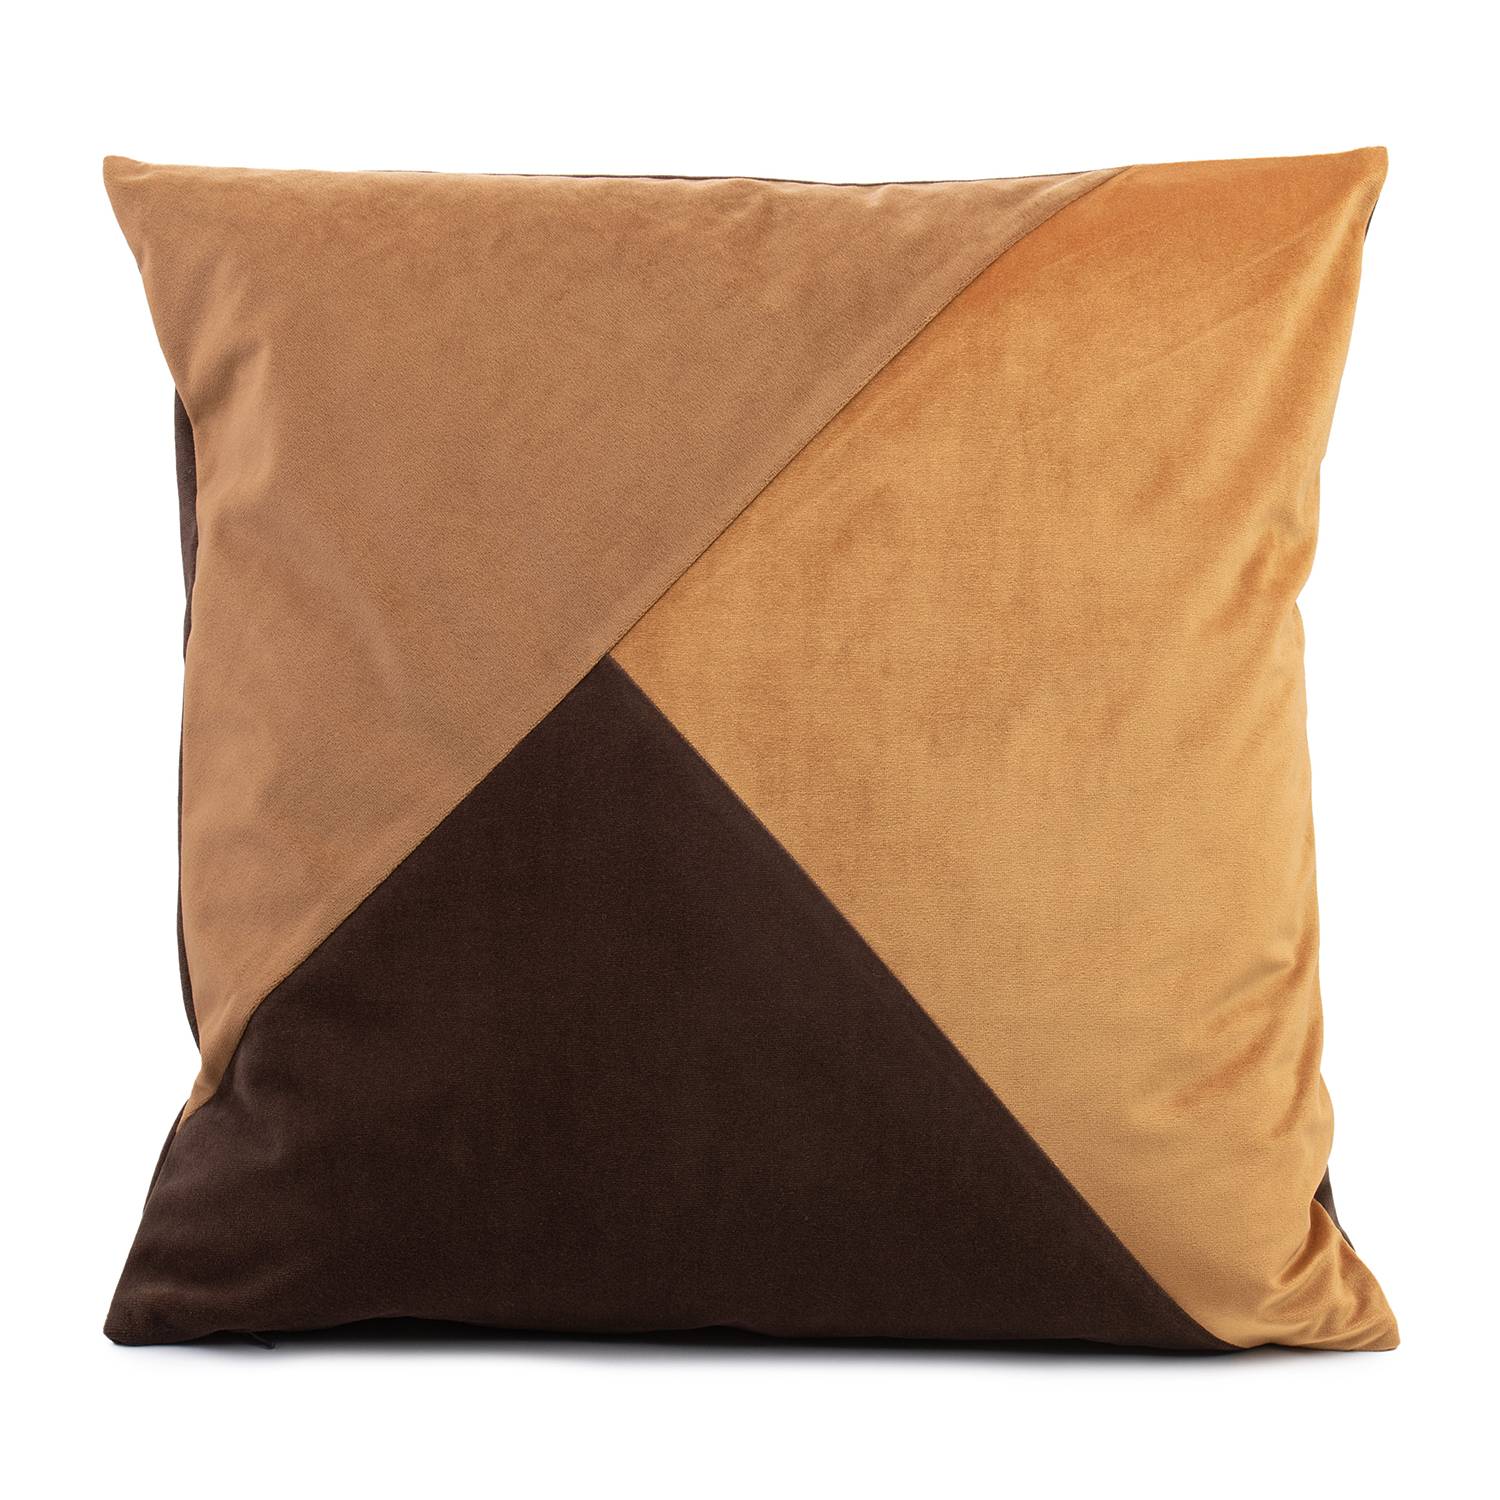 Image of Housse de coussin Peppino 000000001000243545